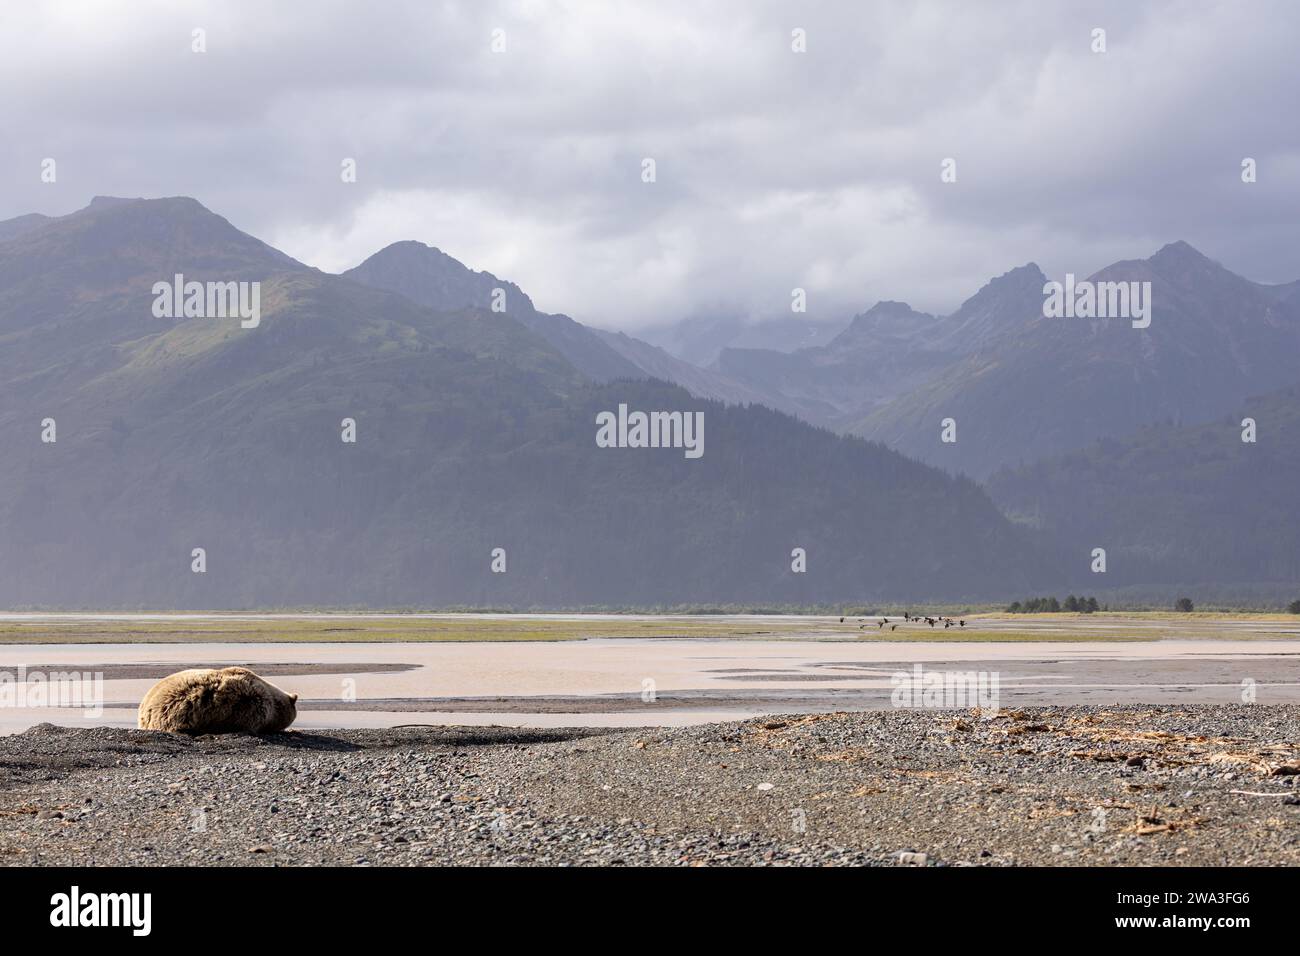 Adult grizzly bear, Ursus arctos horribilis, curled up sleeping on a sandy beach below a mountian range in Lake Clark National Park. Stock Photo